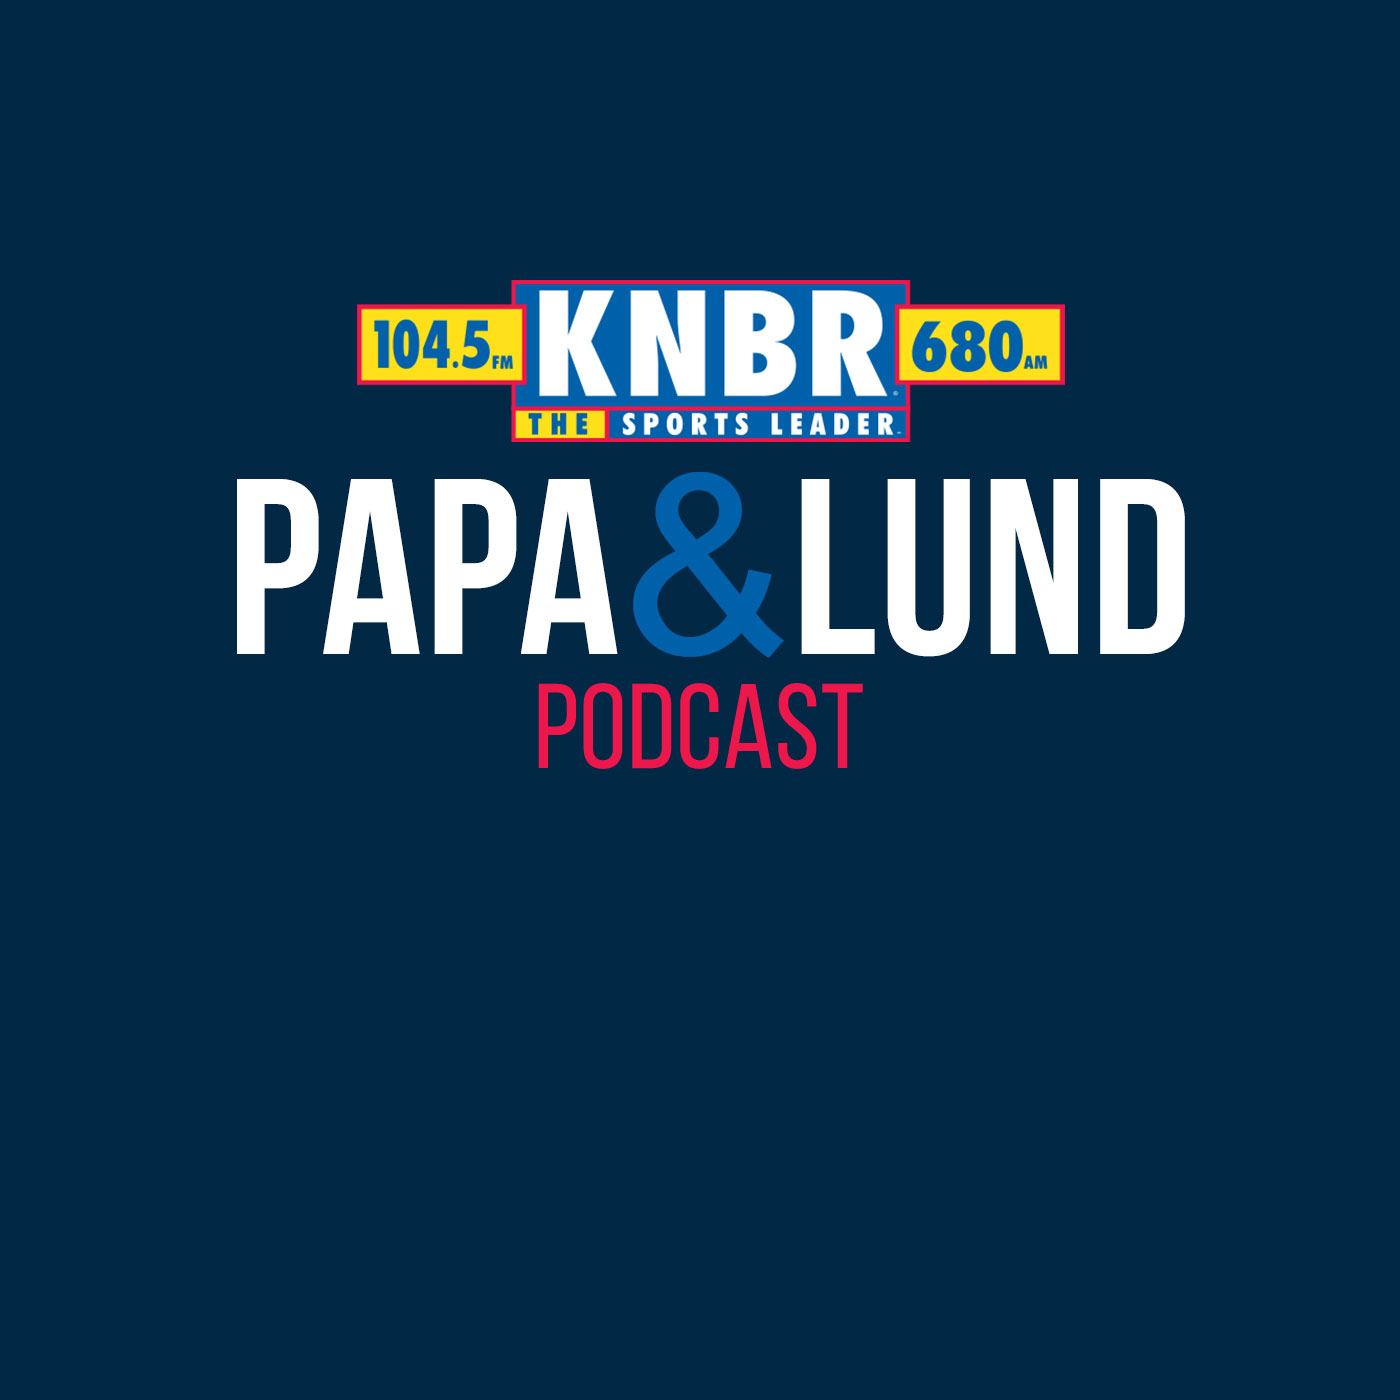 2-29 Brian Anderson joins Papa & Lund to discuss what it is about Madison Square Garden that seems to always bring out the best in Stephen Curry